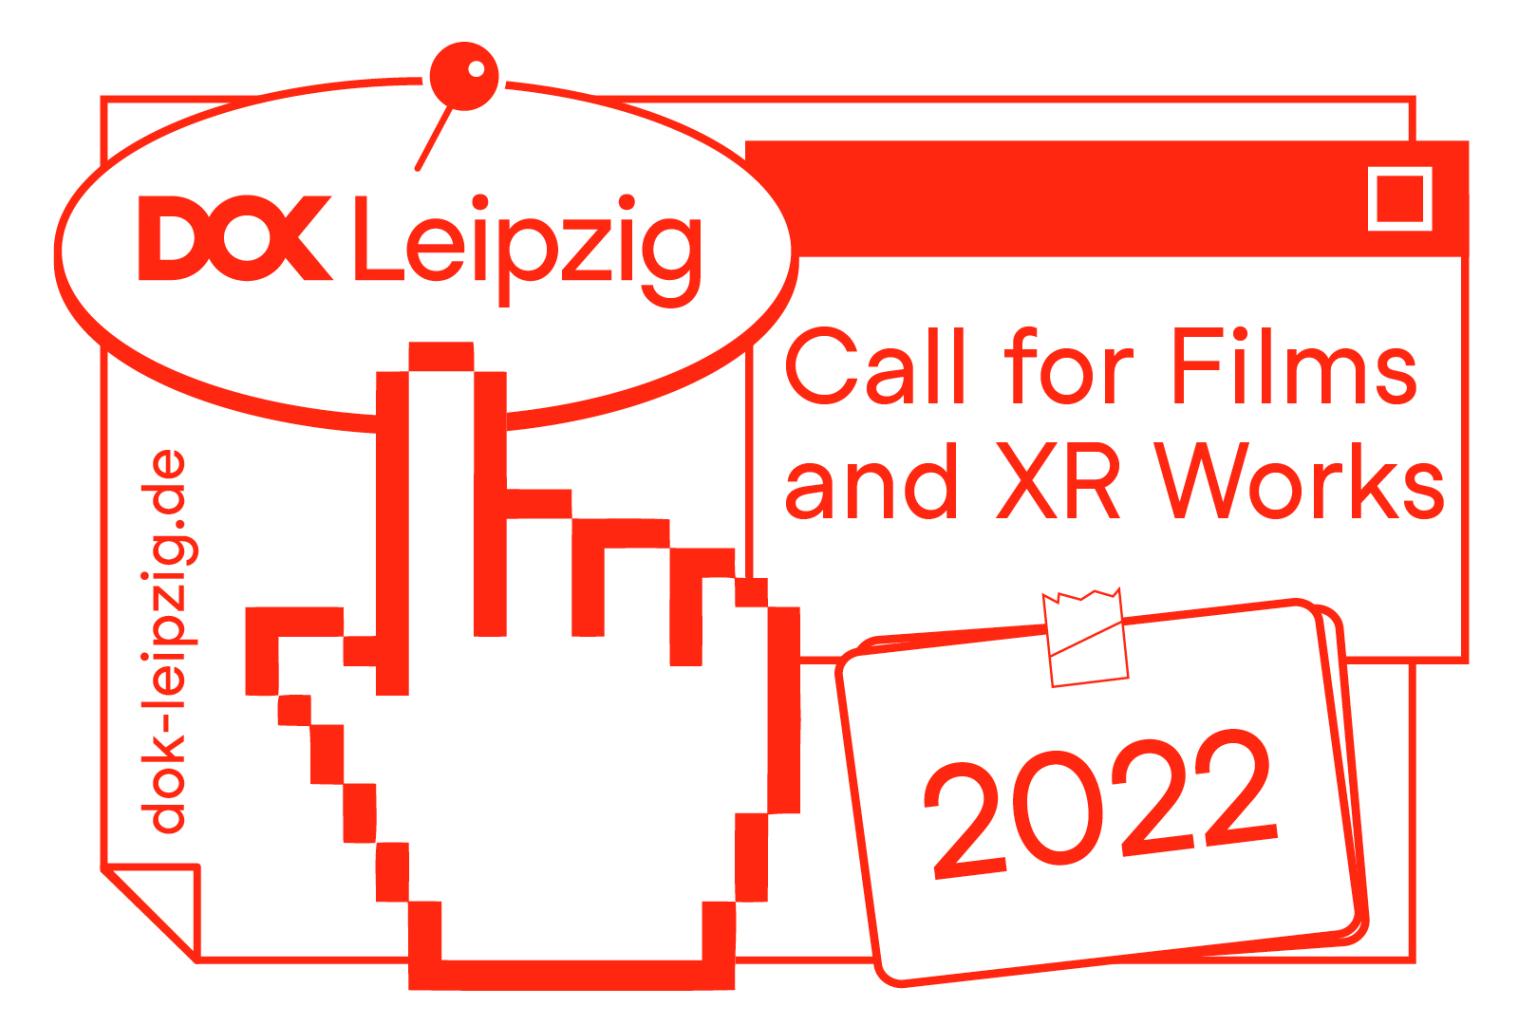 Illustration of a pinboard with three sheets with text: 1. DOK Leipzig, 2. Call for Films & XR Works, 3. 2022. The hand icon of a computer mouse  hovers above.